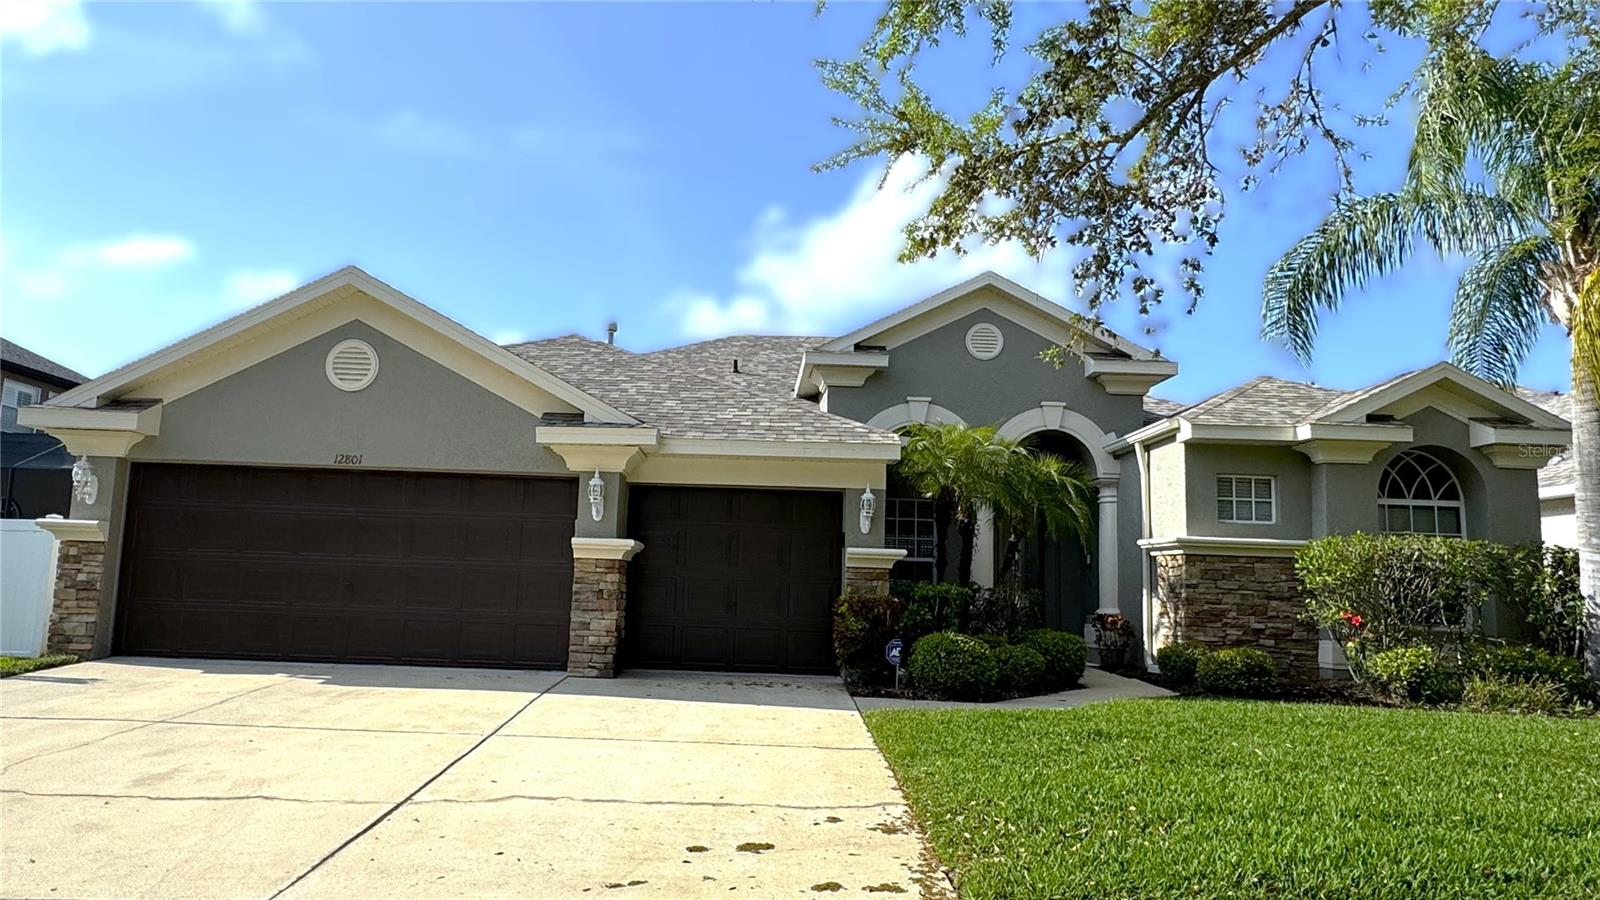 Details for 12801 Stanwyck Circle, TAMPA, FL 33626